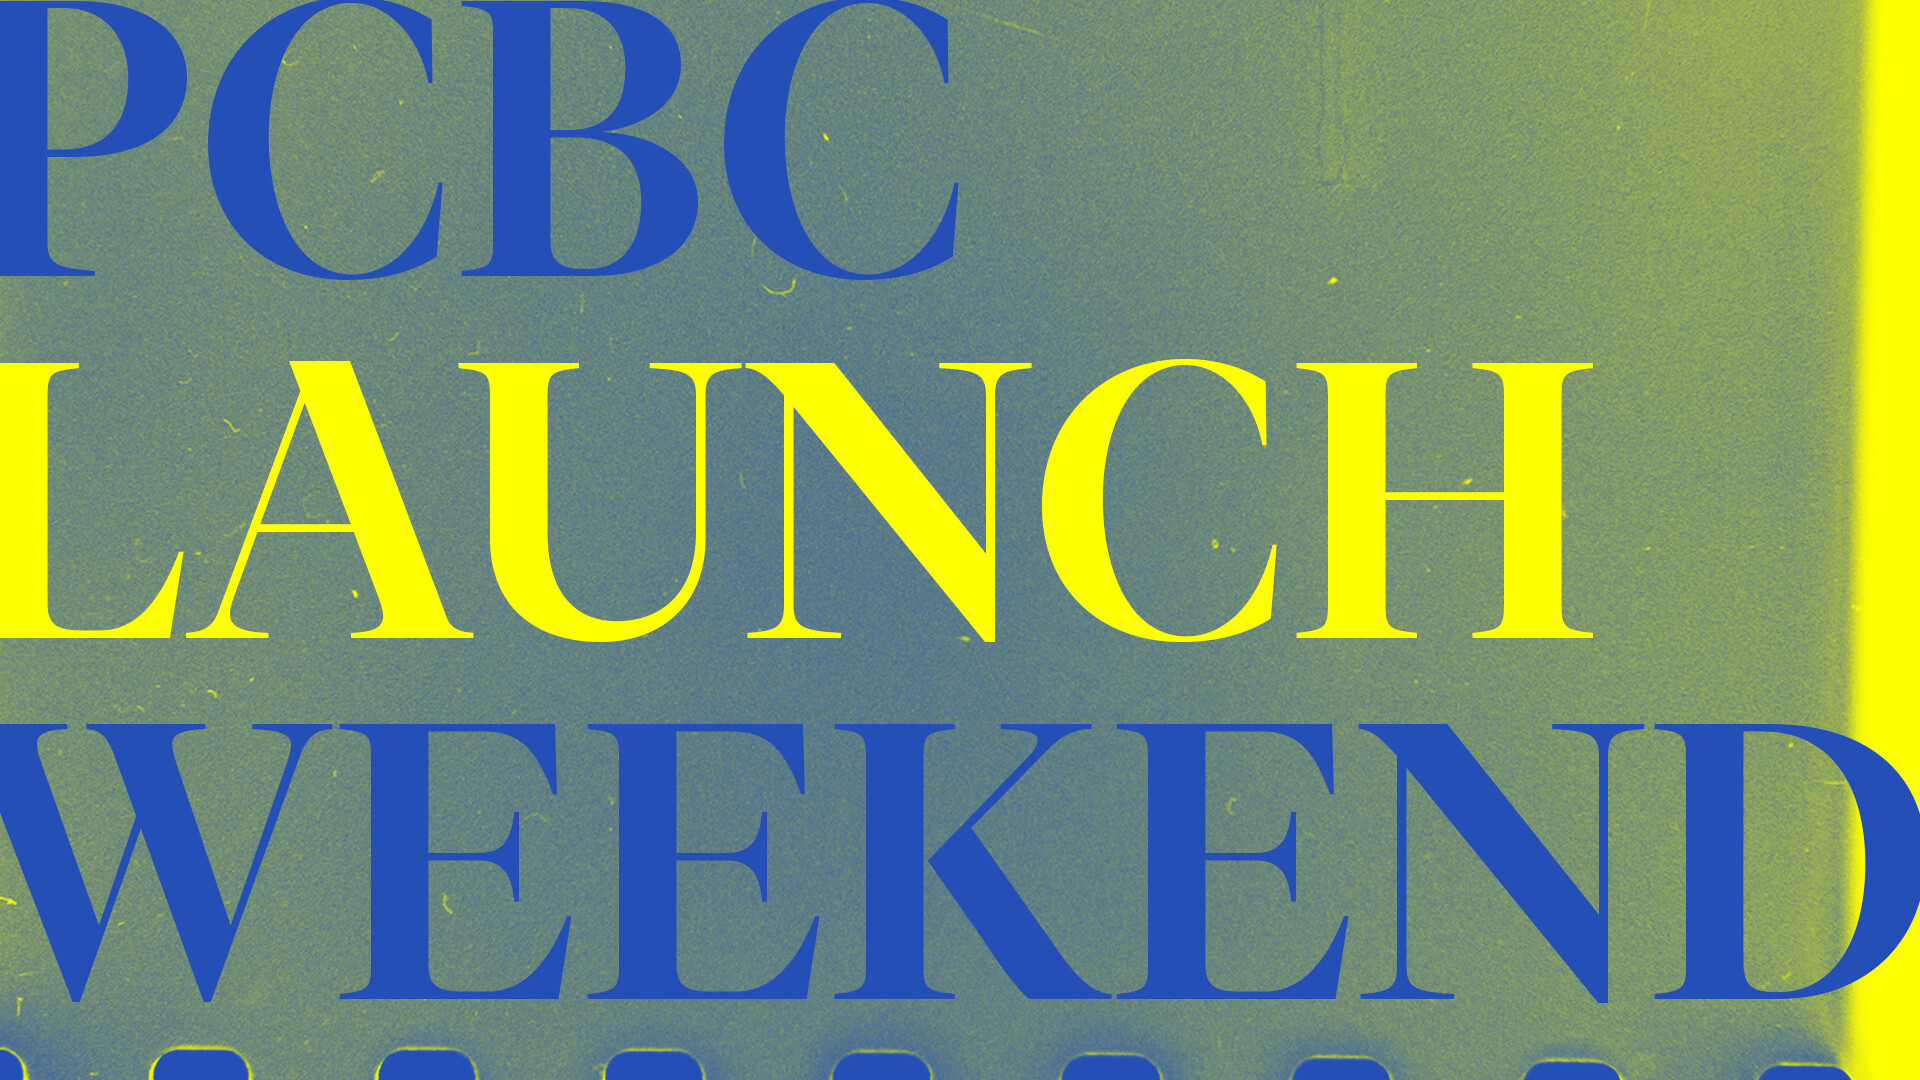 PCBC Launch Weekend